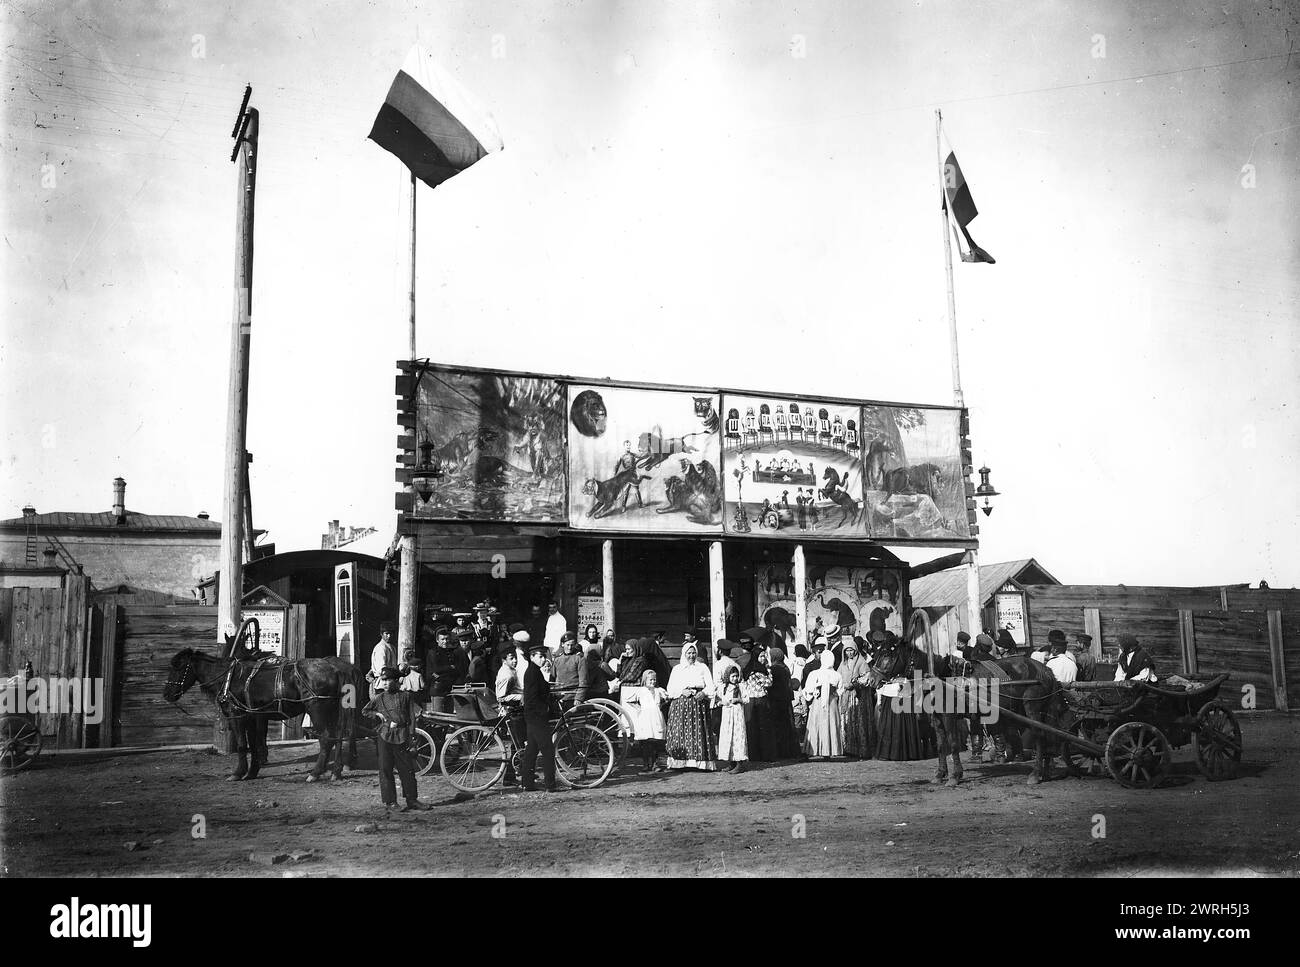 Scottish Circus in Krasnoiarsk, 1916. From a collection iwhich ncludes more than four hundred photographs of daily life in Yenisei Province in the late tsarist period. Photographs include peasants, Cossacks, and high-ranking officials. Krasnoiarsk Krai Museum of Regional History and Folklife Stock Photo